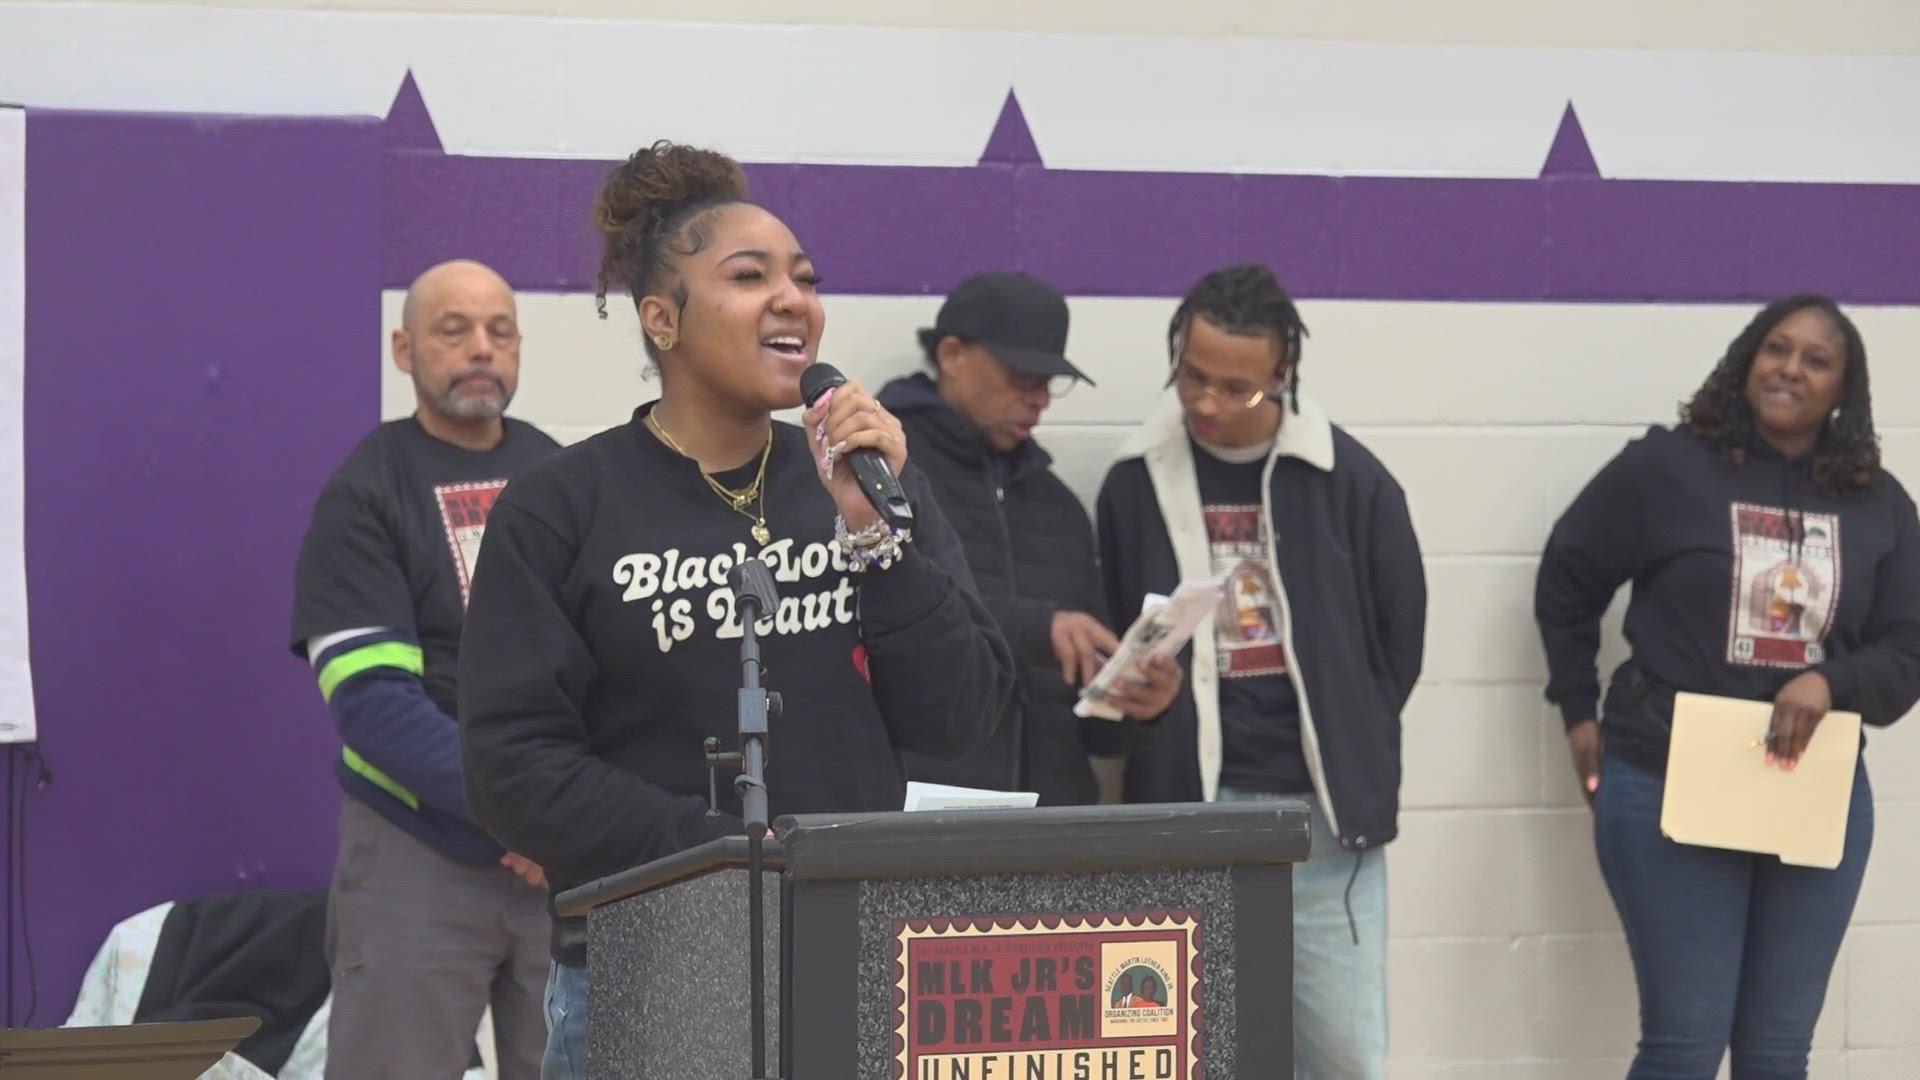 The Seattle MLK Jr. Coalition held events with the theme "Dream Unfinished," focusing on the work still left to do.